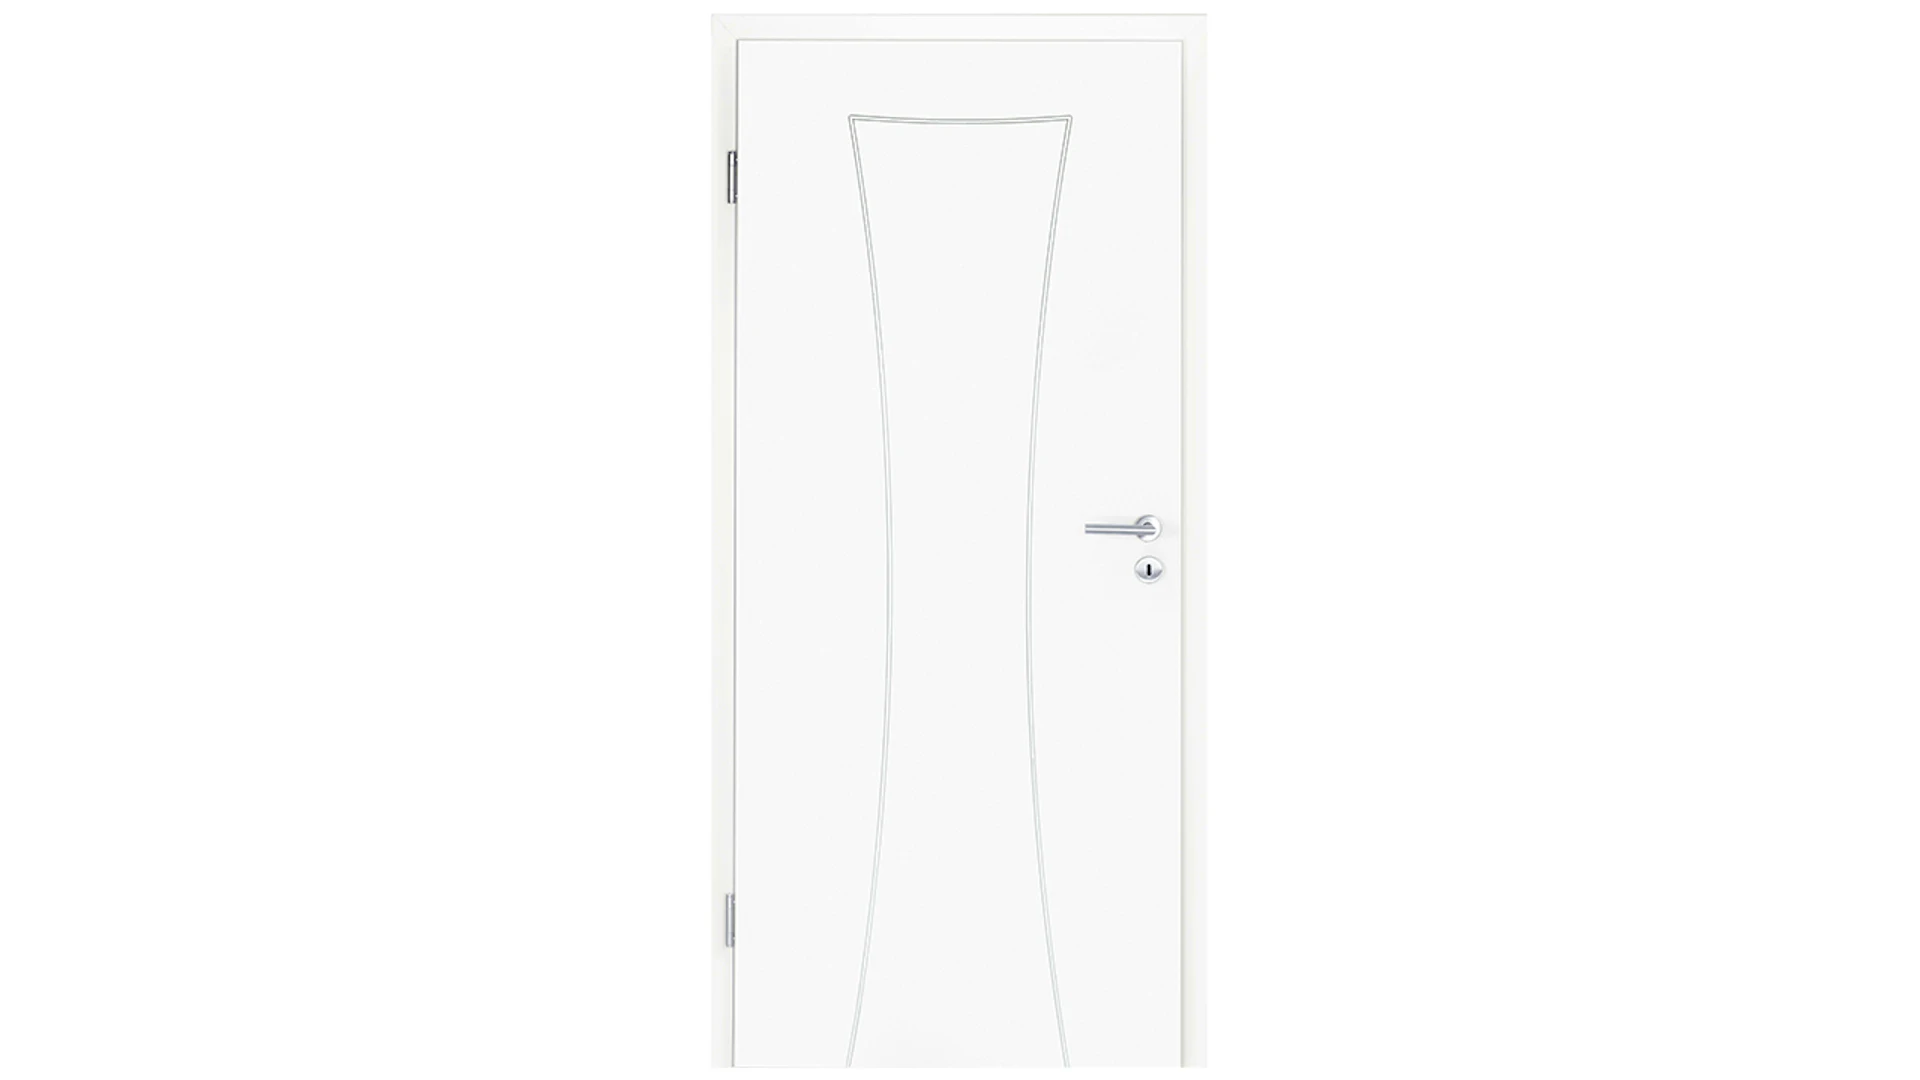 planeo interior door lacquer 2.0 - Kuno 9010 white lacquer 1985 x 735 mm DIN L - round RSP hinge 3-t